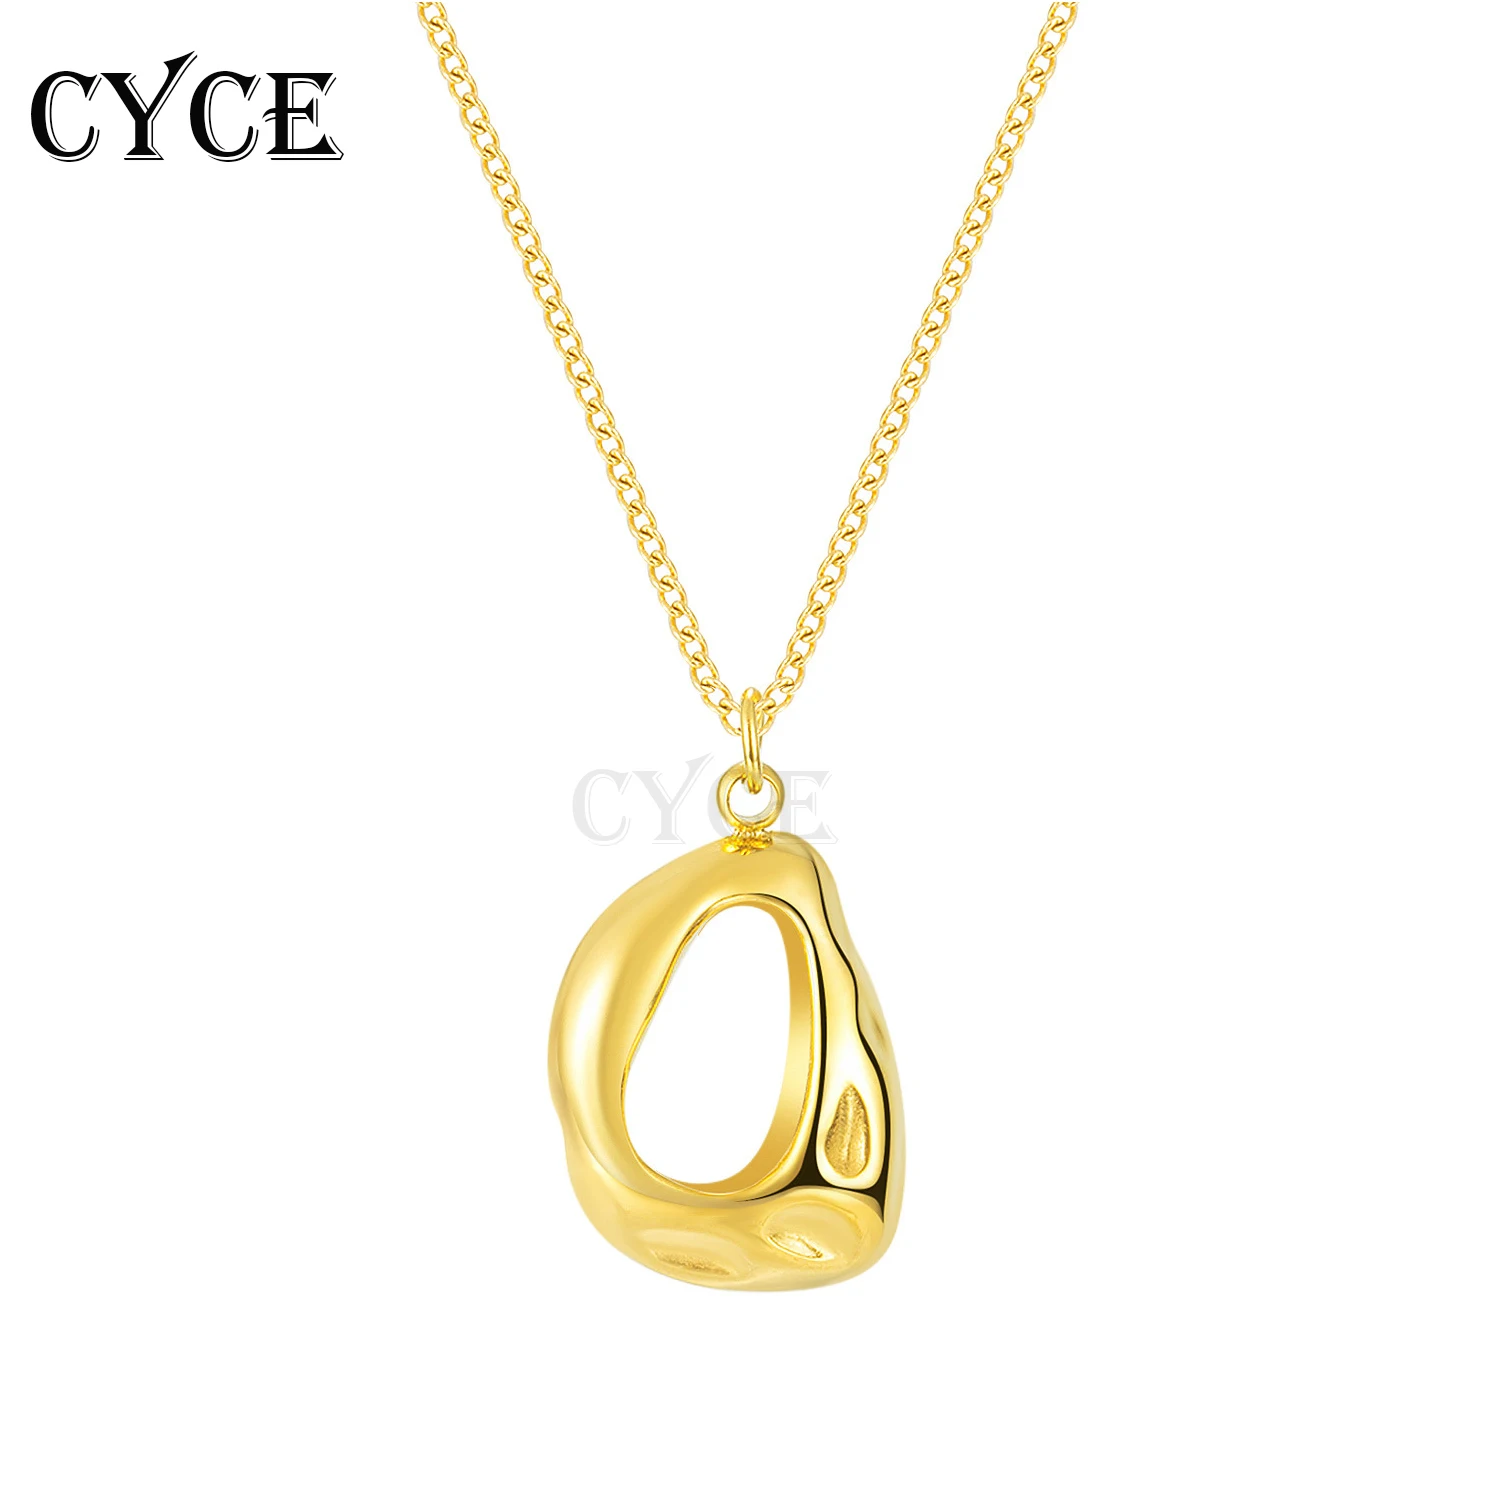 CYCE Jewelry Stainless Steel Hip Hop Necklace for Women Simple Titanium Steel Irregular Hollow Oval Pendant Necklace Accessories